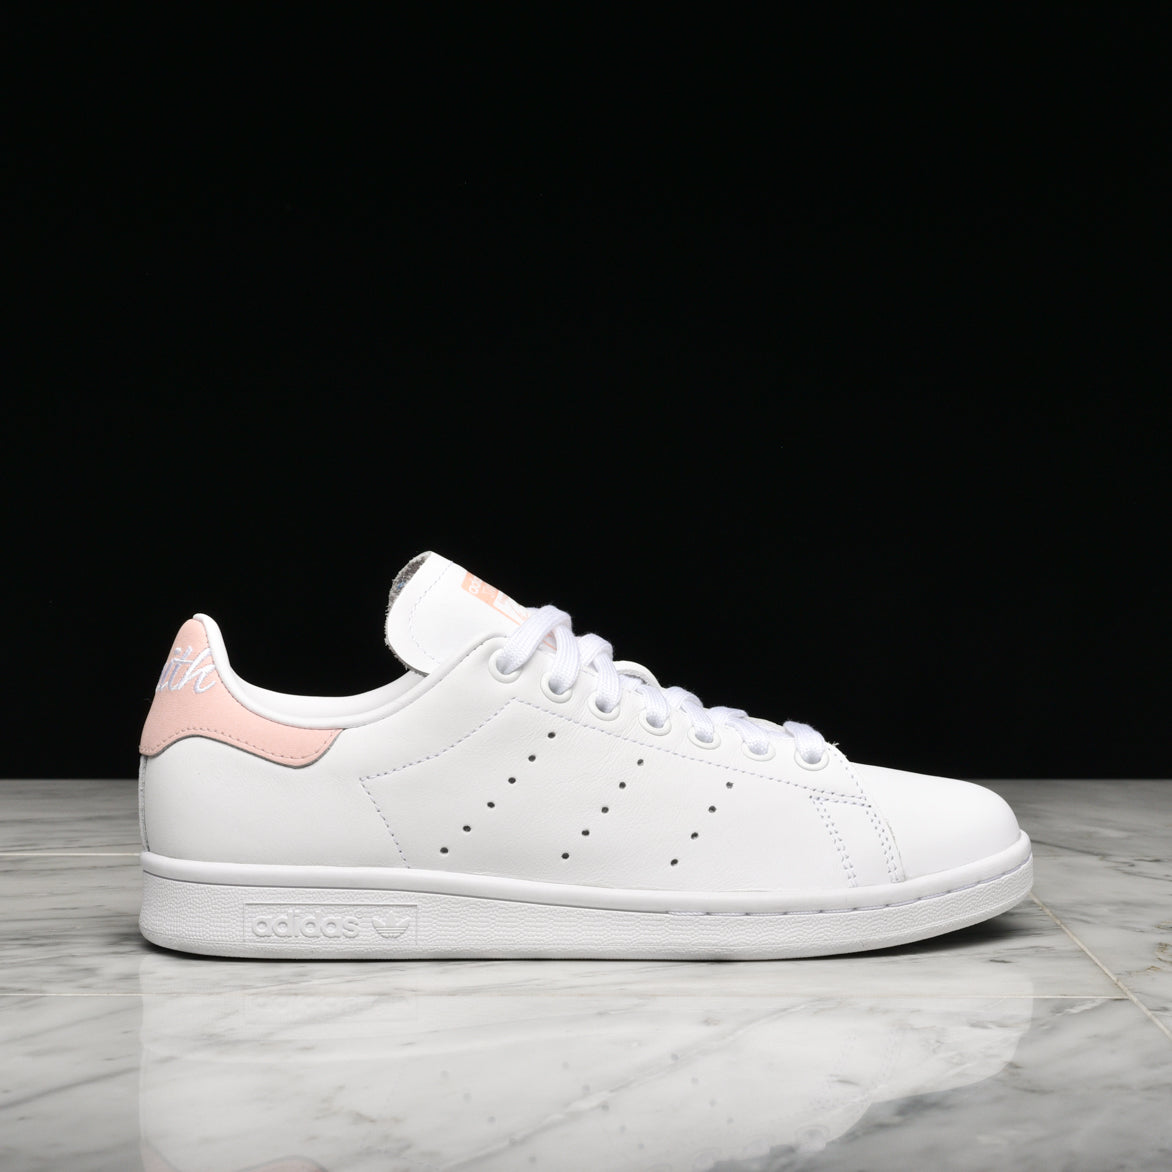 Diskret stang springvand WMNS STAN SMITH - WHITE / ICE PINK / WHITE | lapstoneandhammer.com